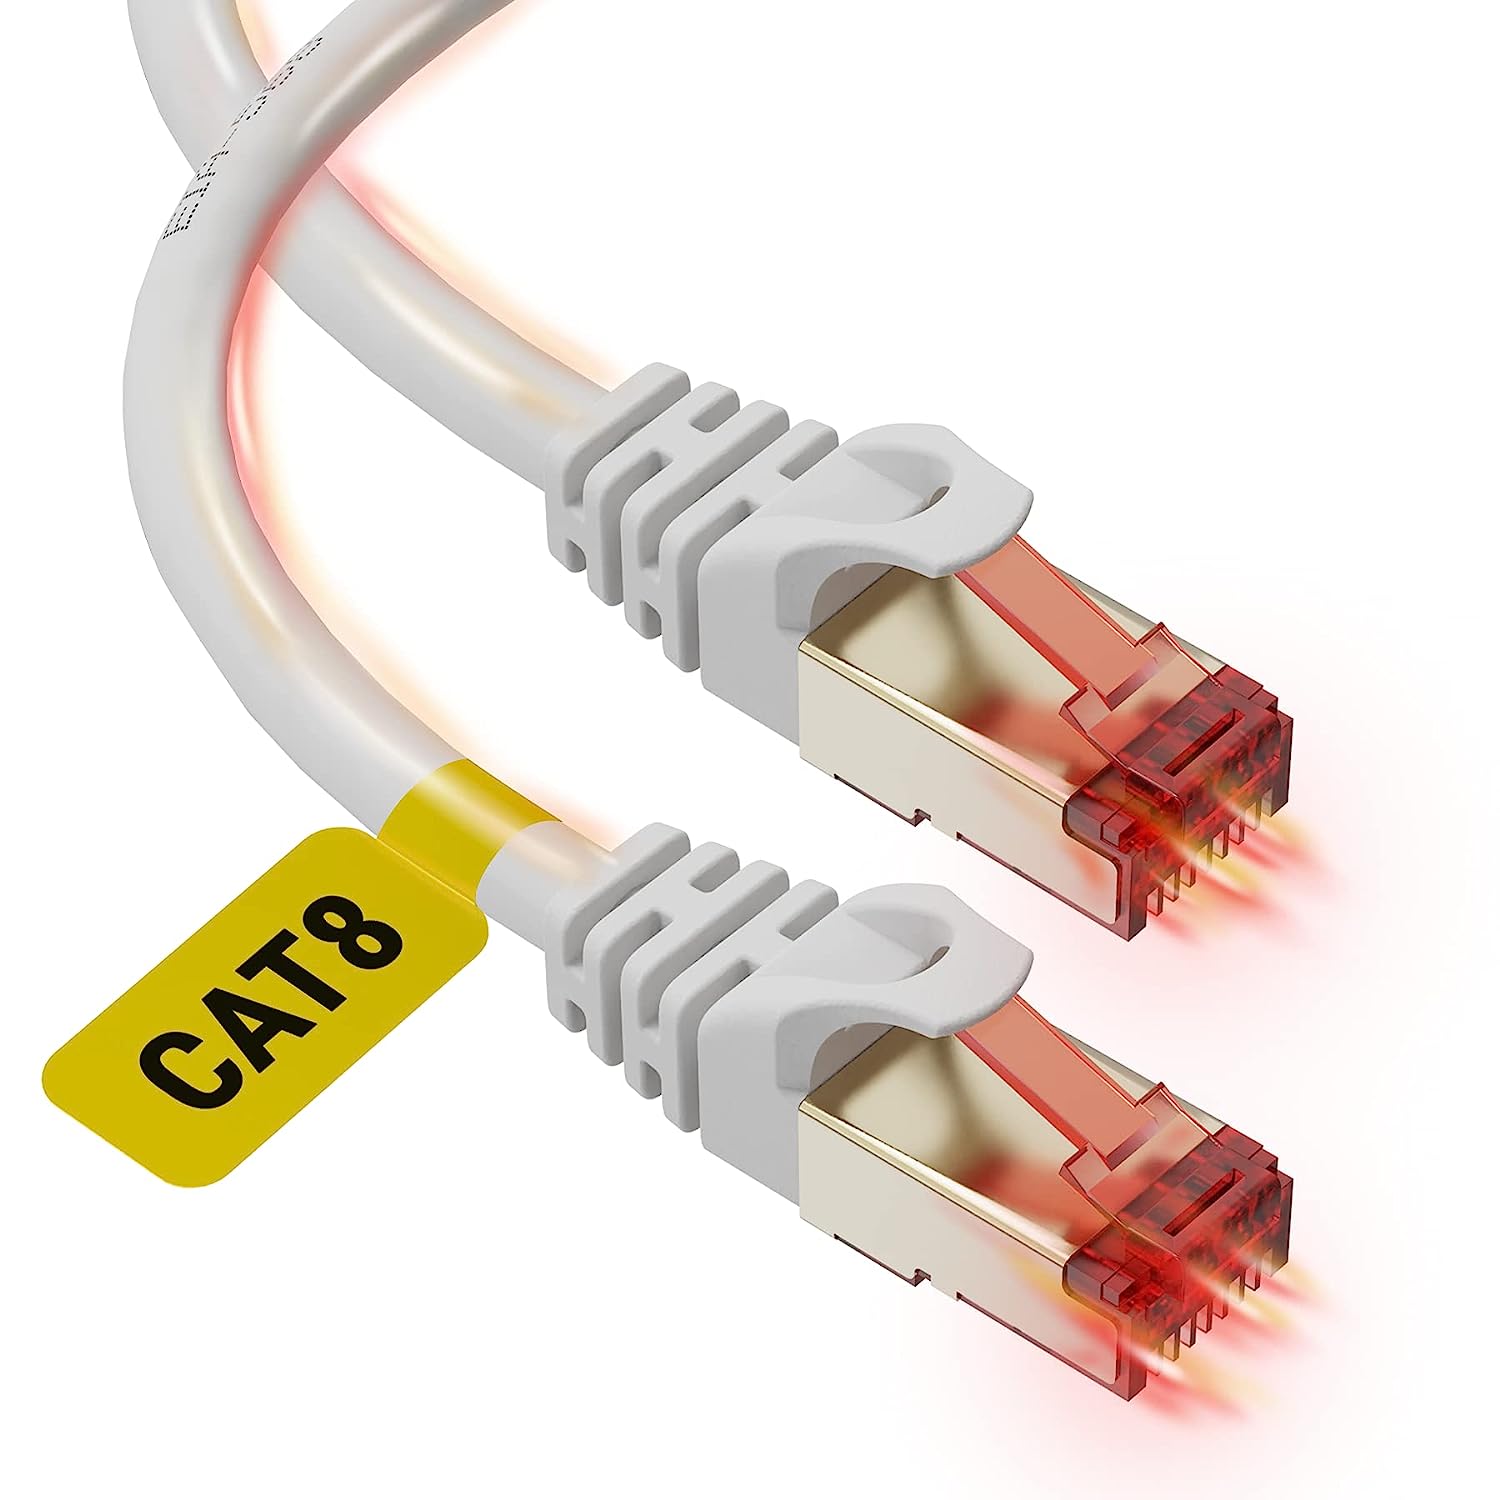 Cat 8 Ethernet Cable 6ft (2 Pack) - High Speed Cat8 [...]